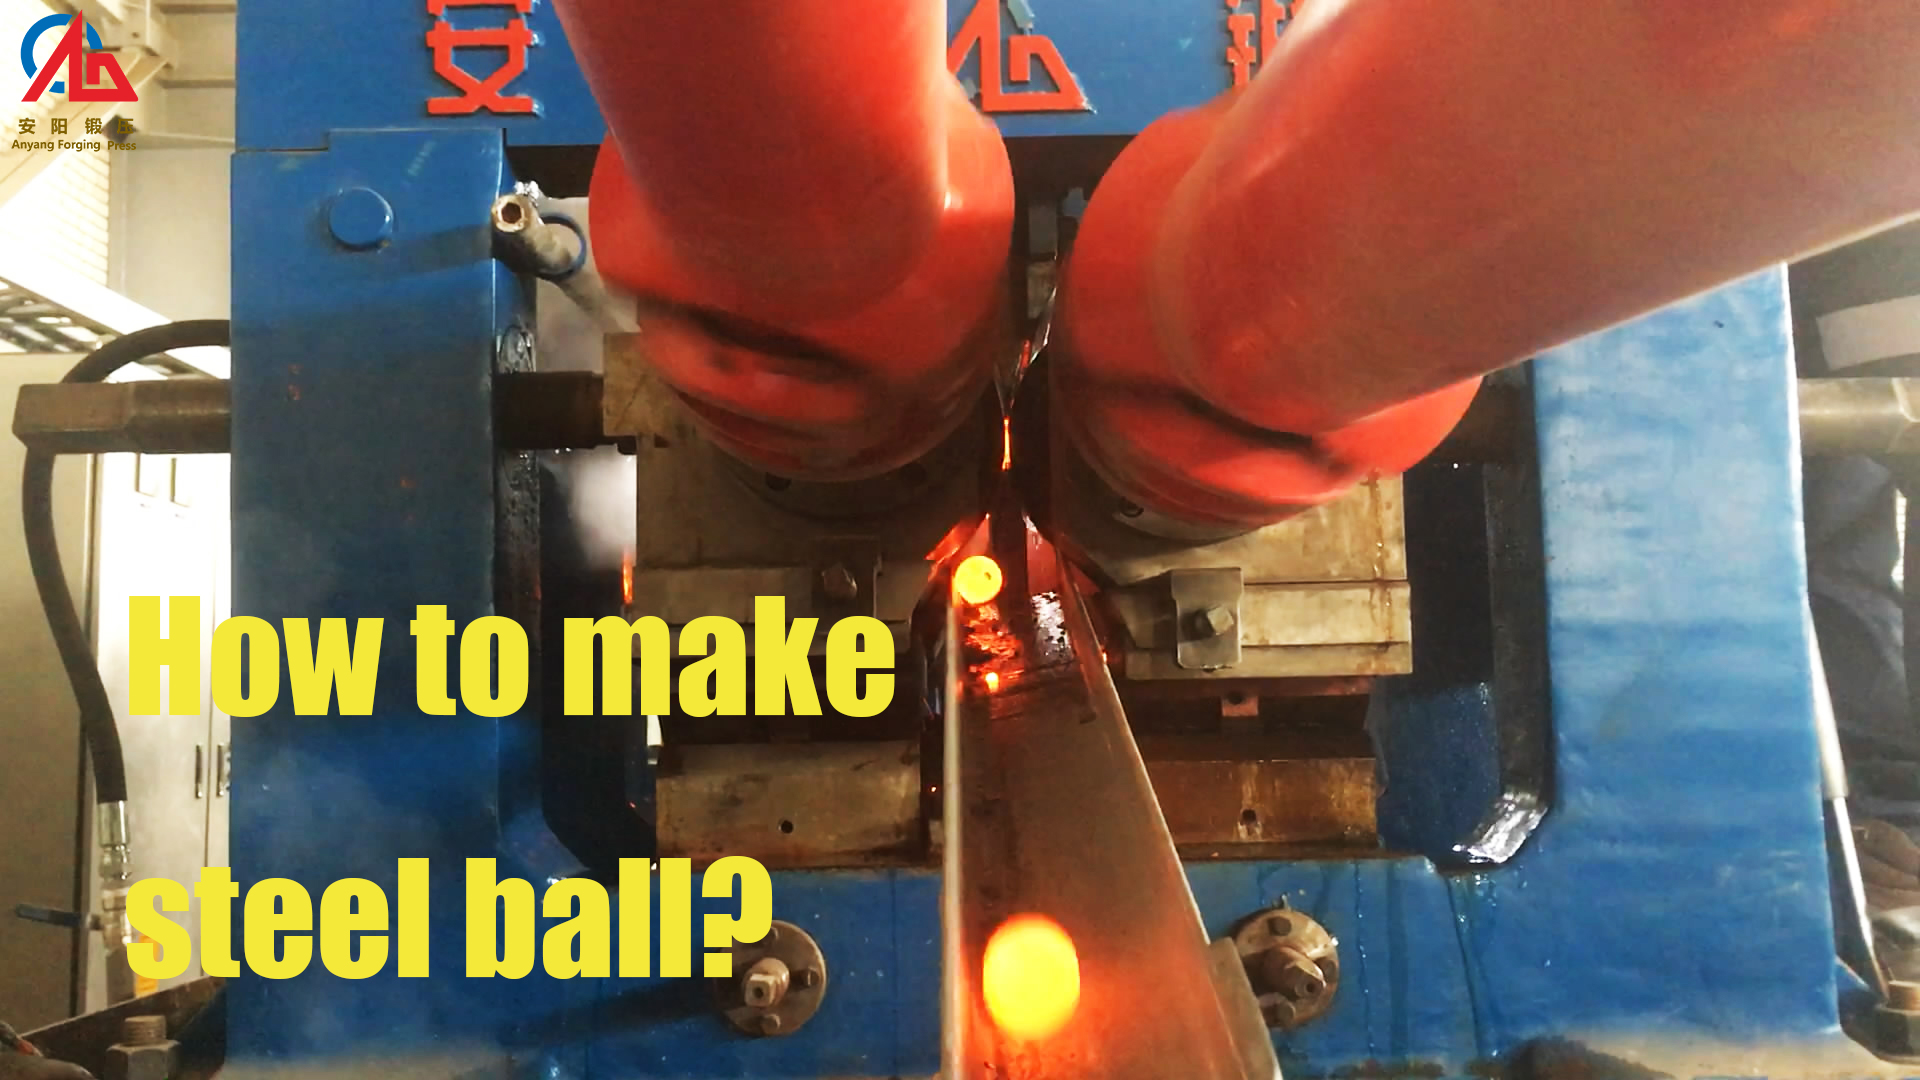 steel ball, skew rolling mill, automatic production line, make steel balls